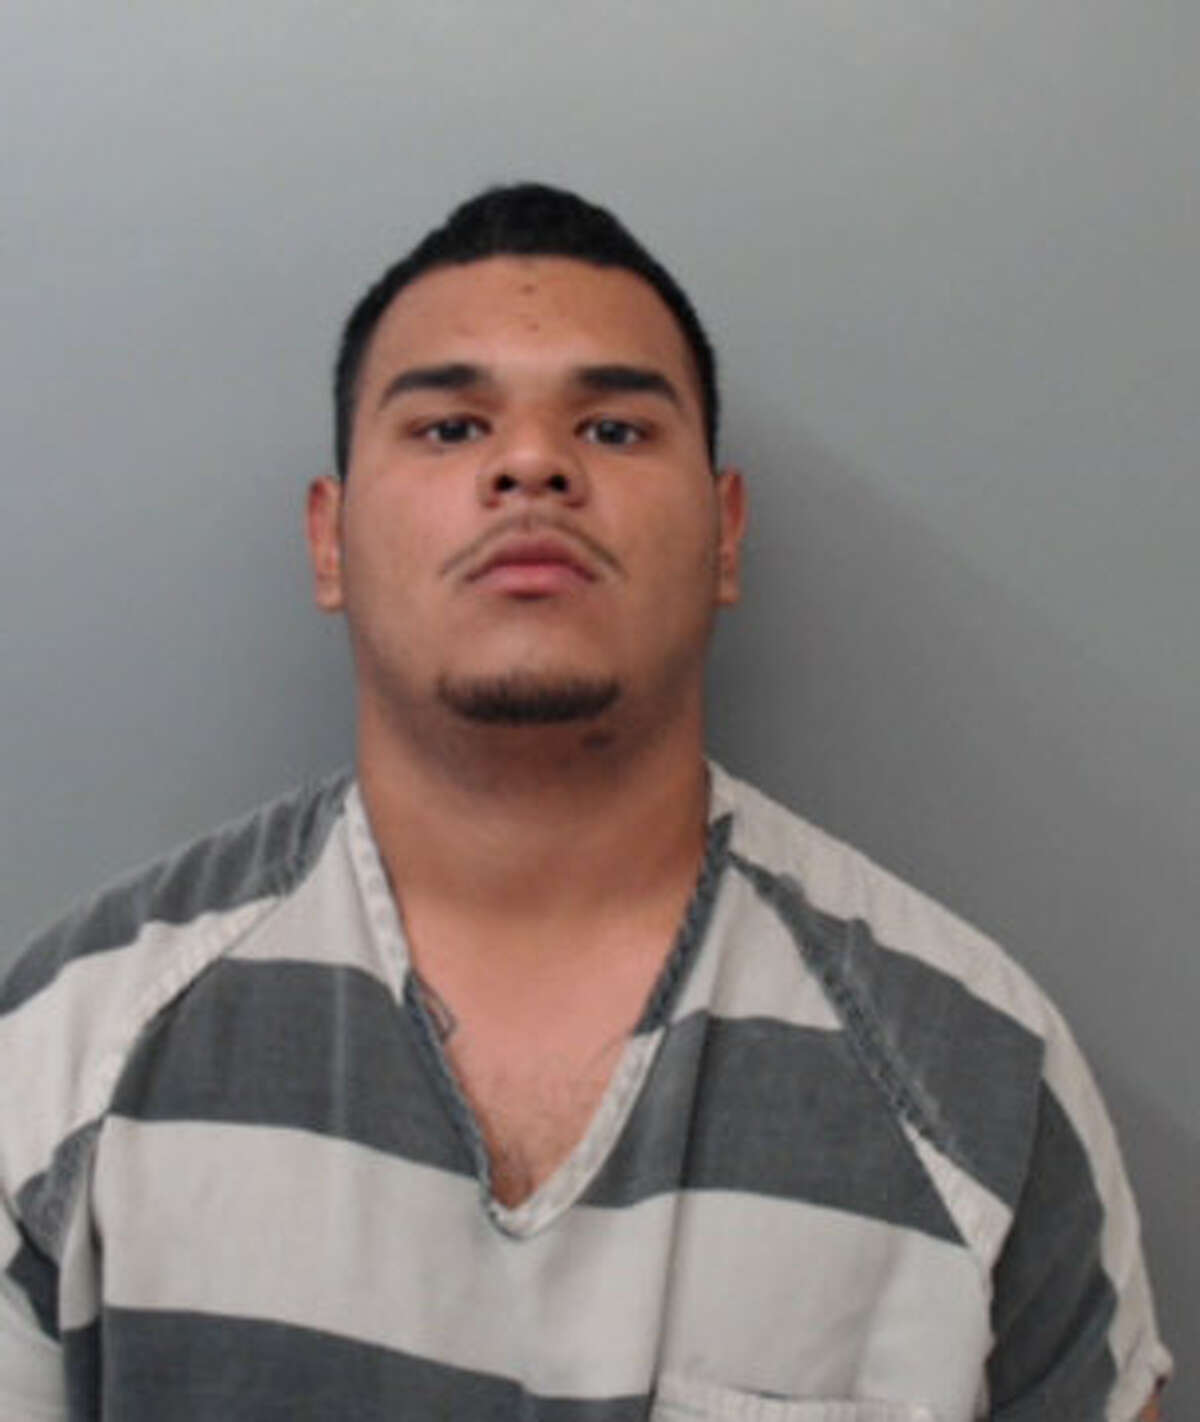 Rene Ramirez, 20, was charged with reckless driving and striking an unattended vehicle.